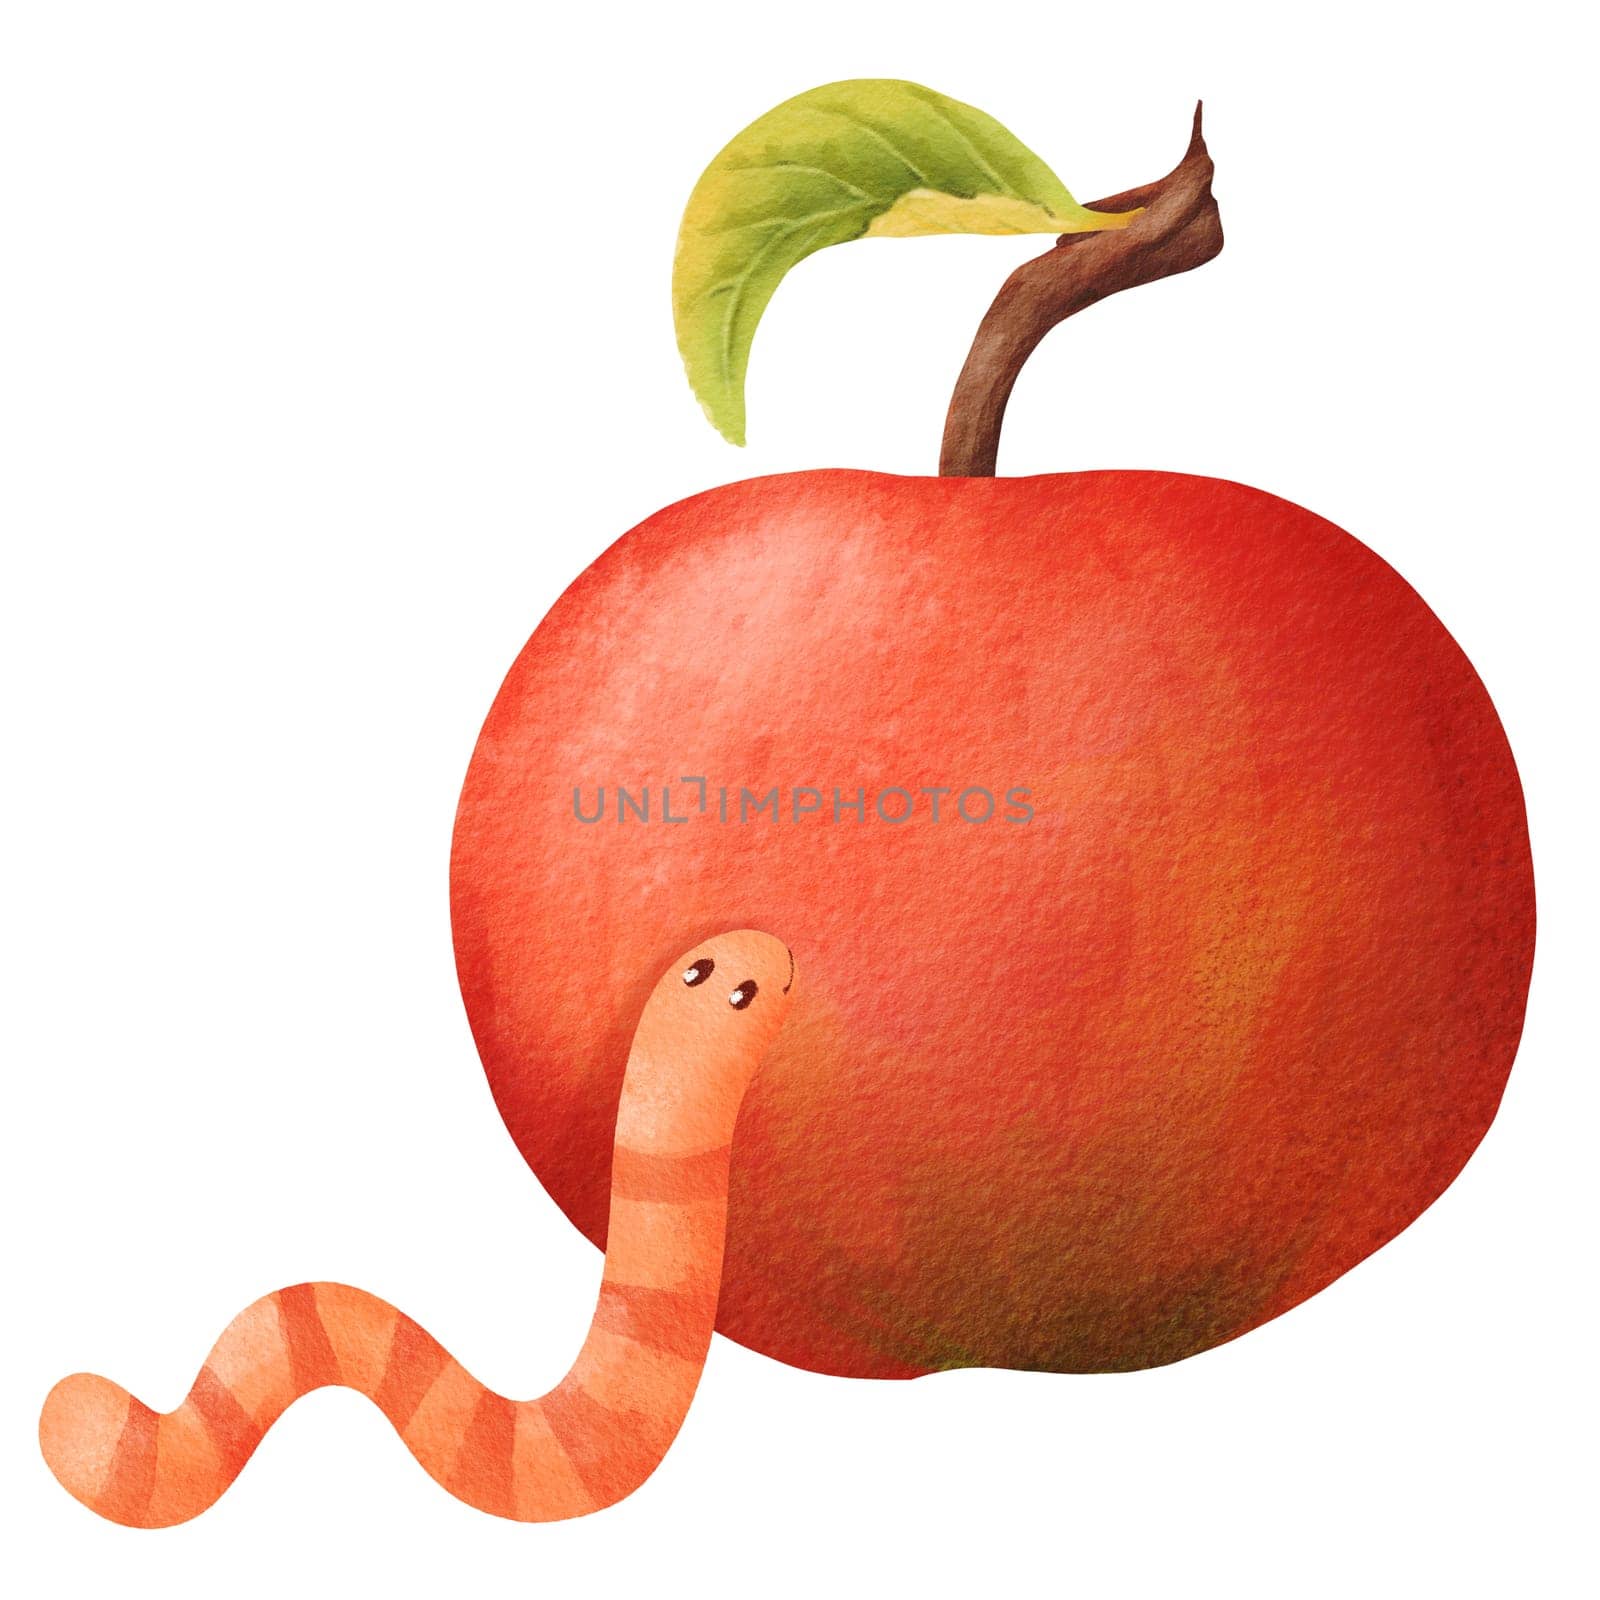 watercolor composition. a worm with an apple. Ideal for children's books, posters, invitations, and other creative projects that aim to evoke a sense of joy and imagination by Art_Mari_Ka